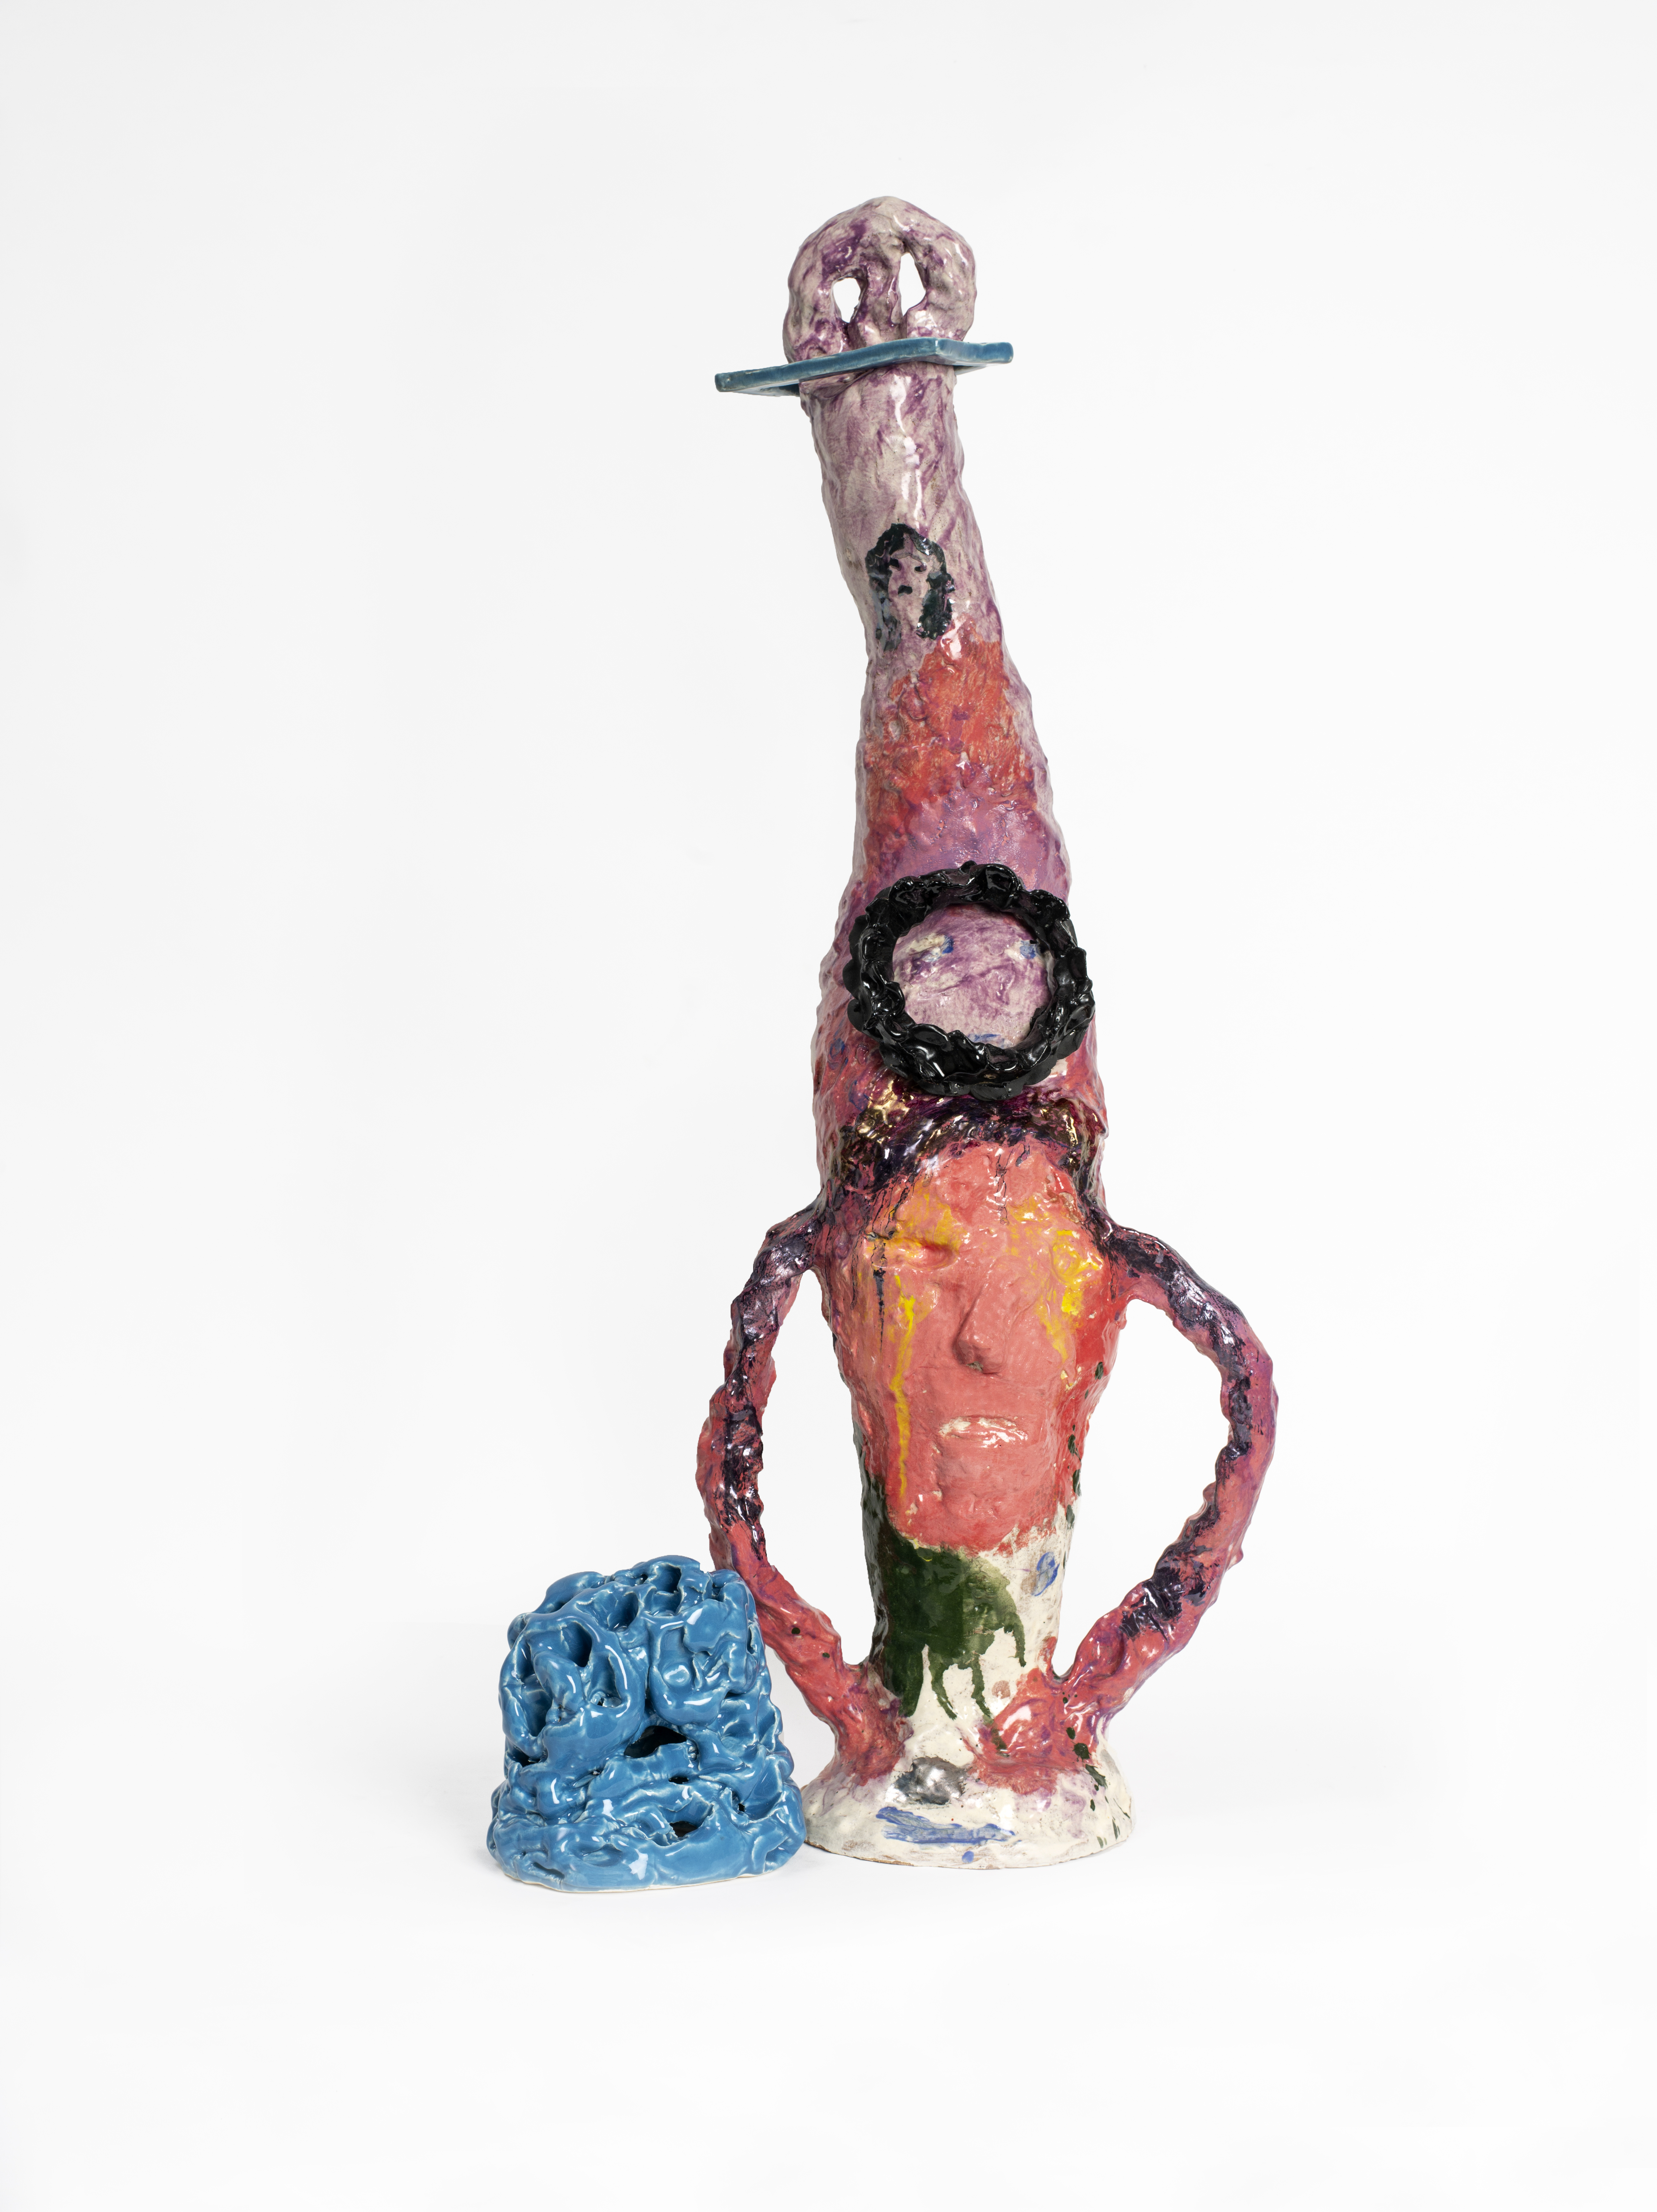 A brightly coloured abstract ceramic sculpture.